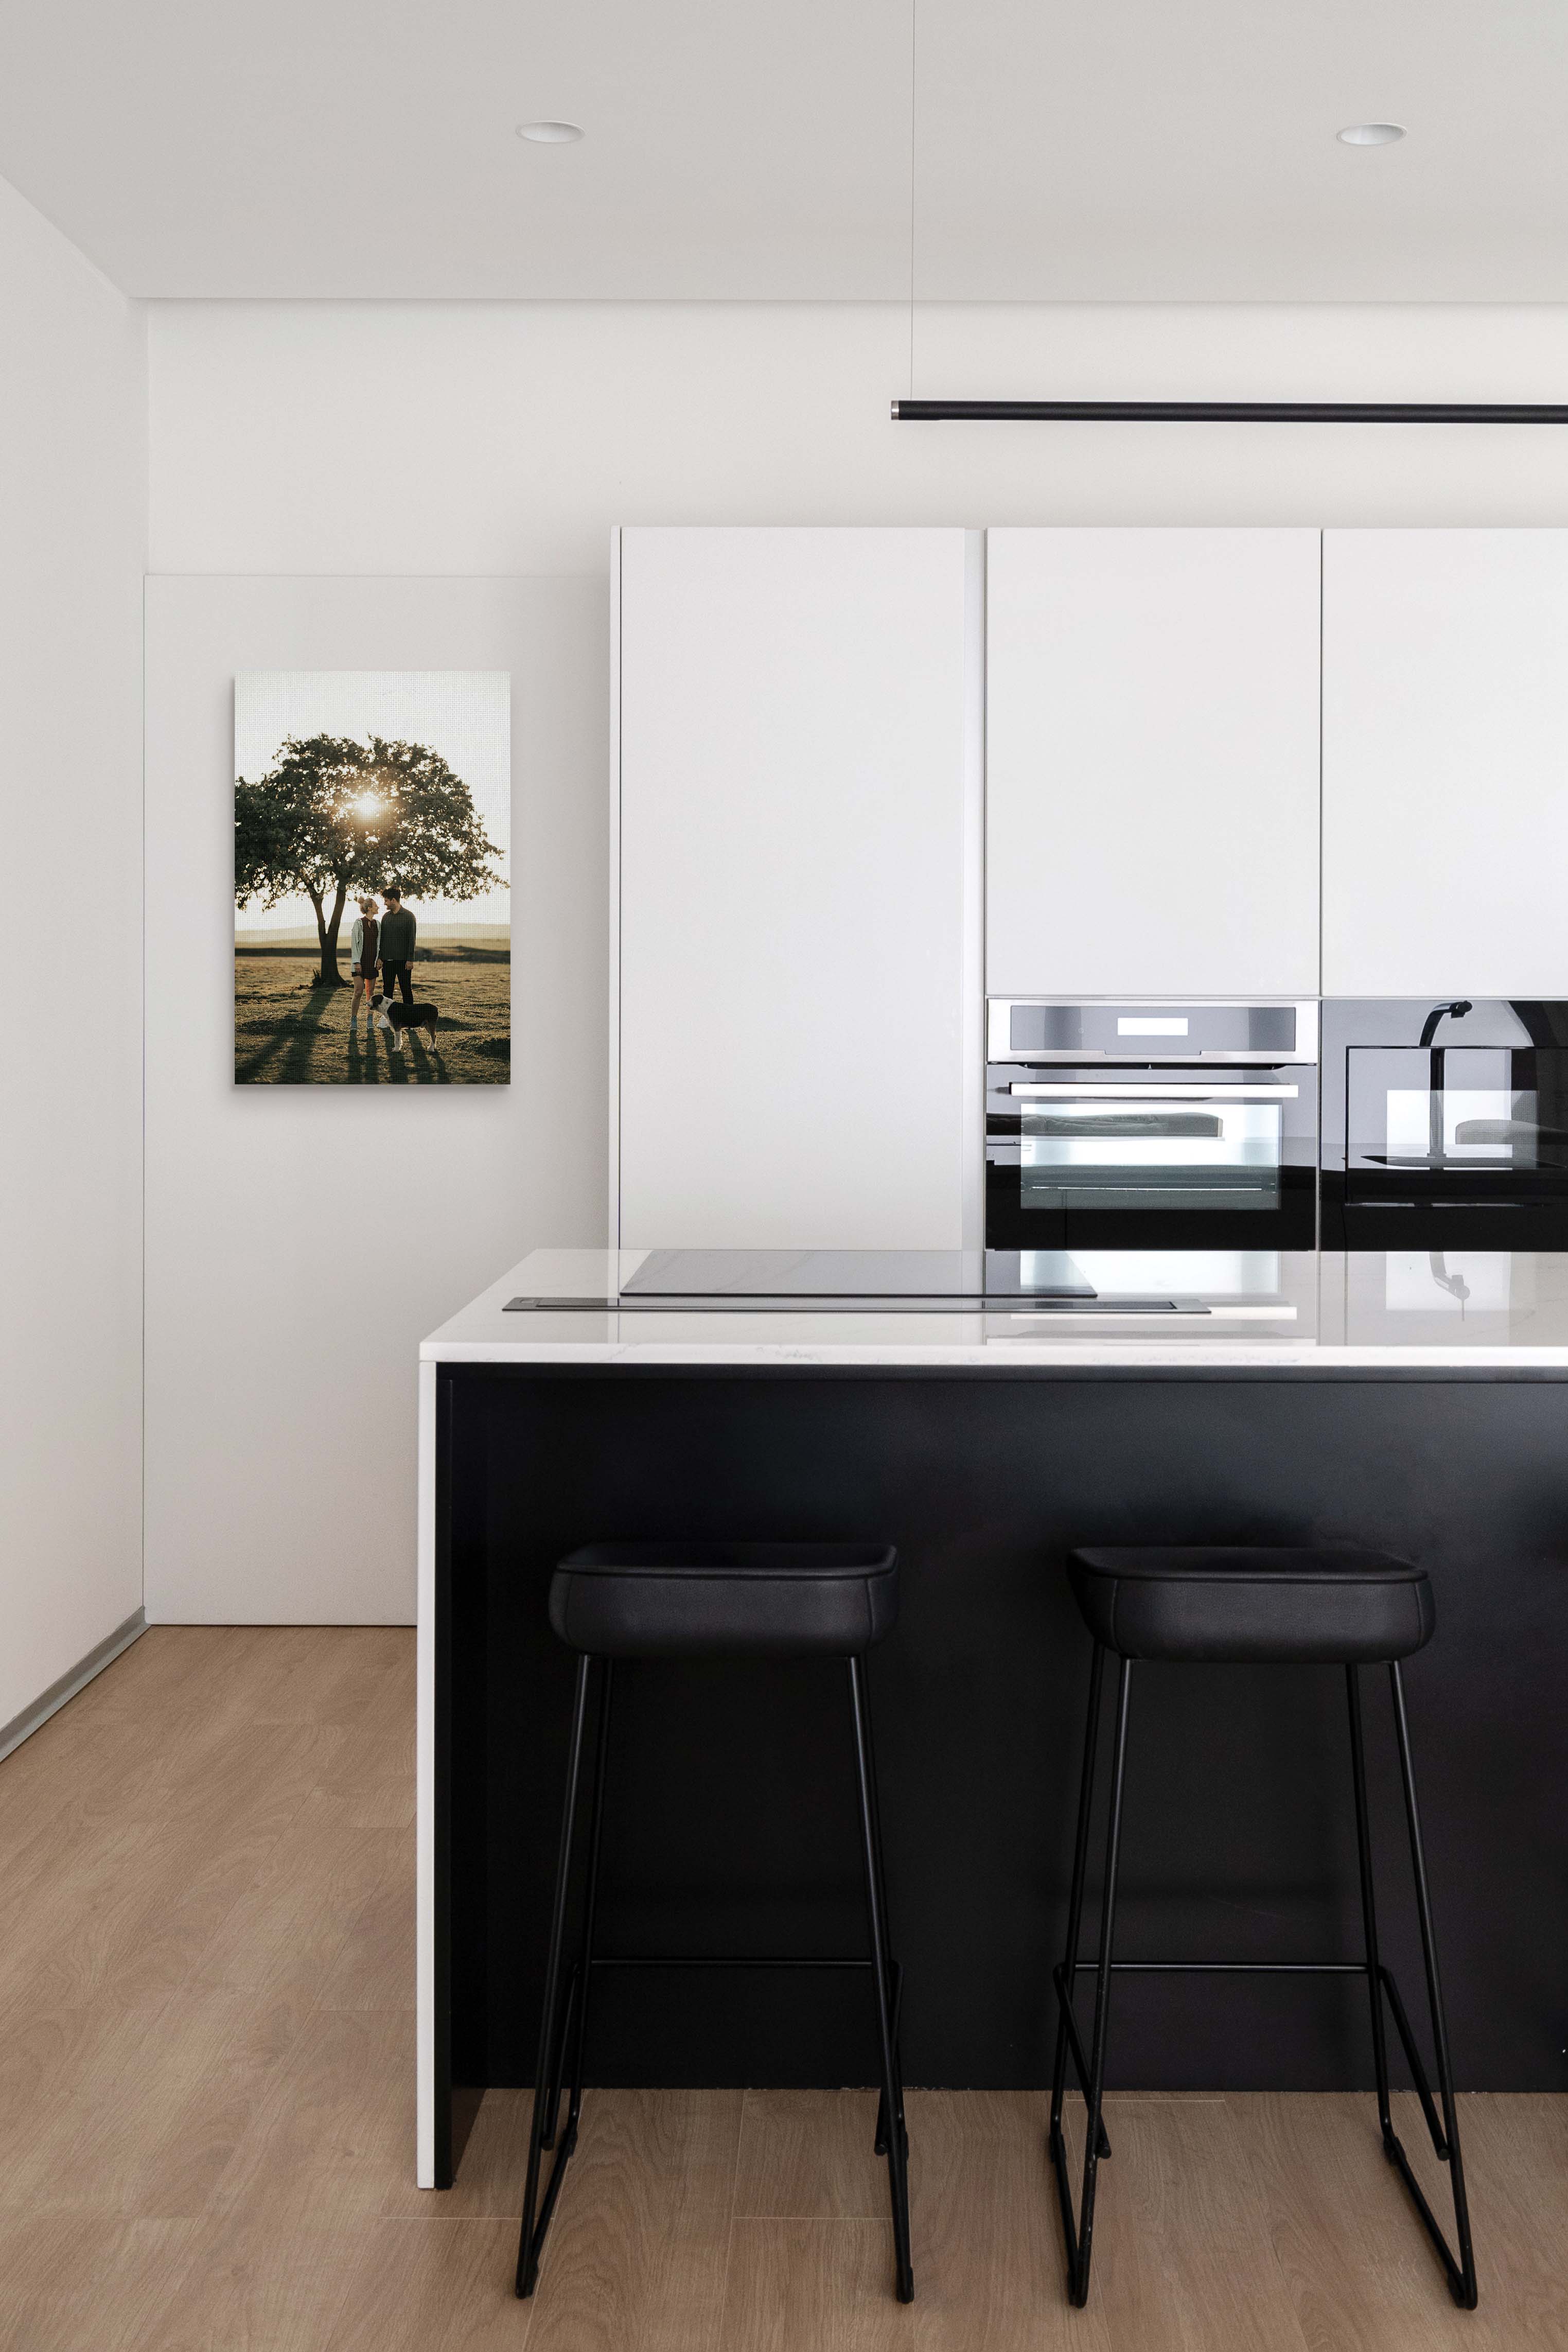 Canvas print of couple under a tree in kitchen